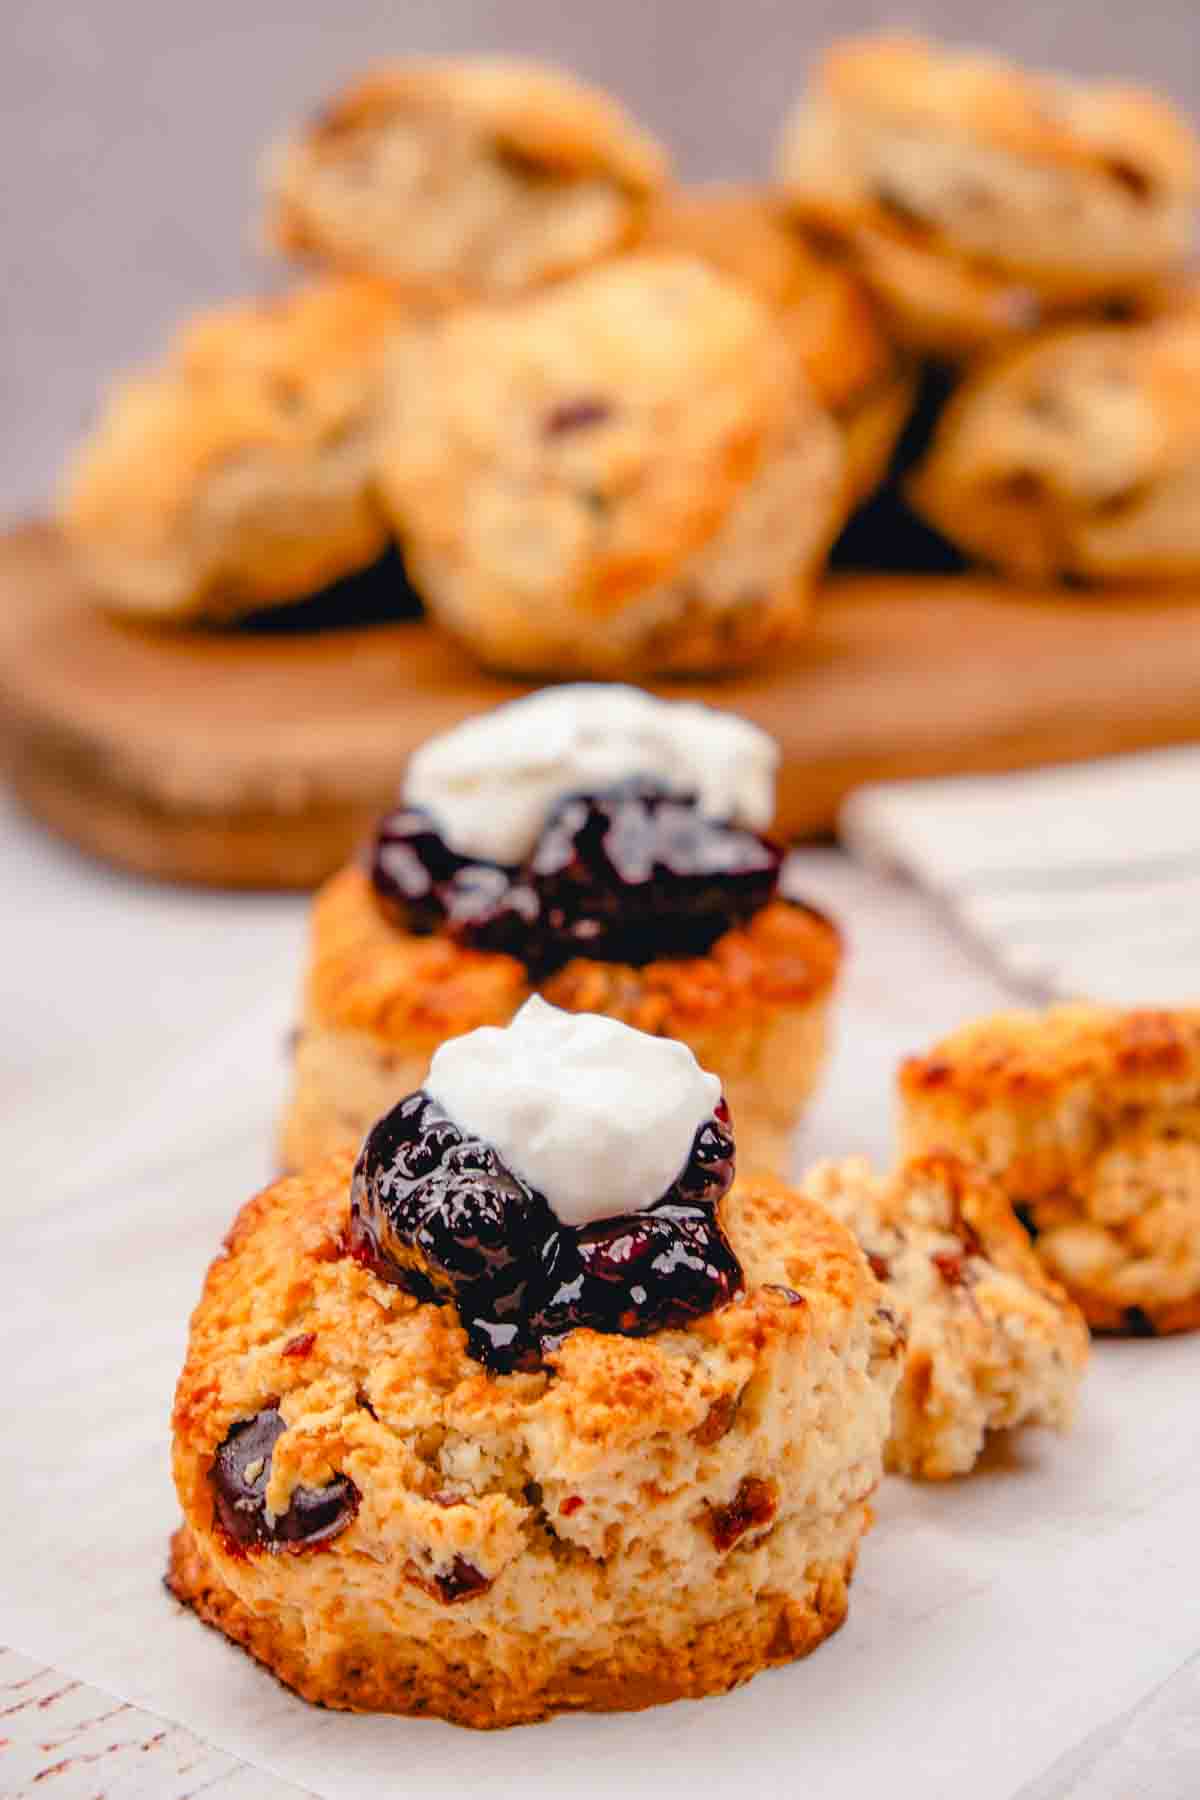 A date scone topped with jam and cream. More scones are visible in the background.